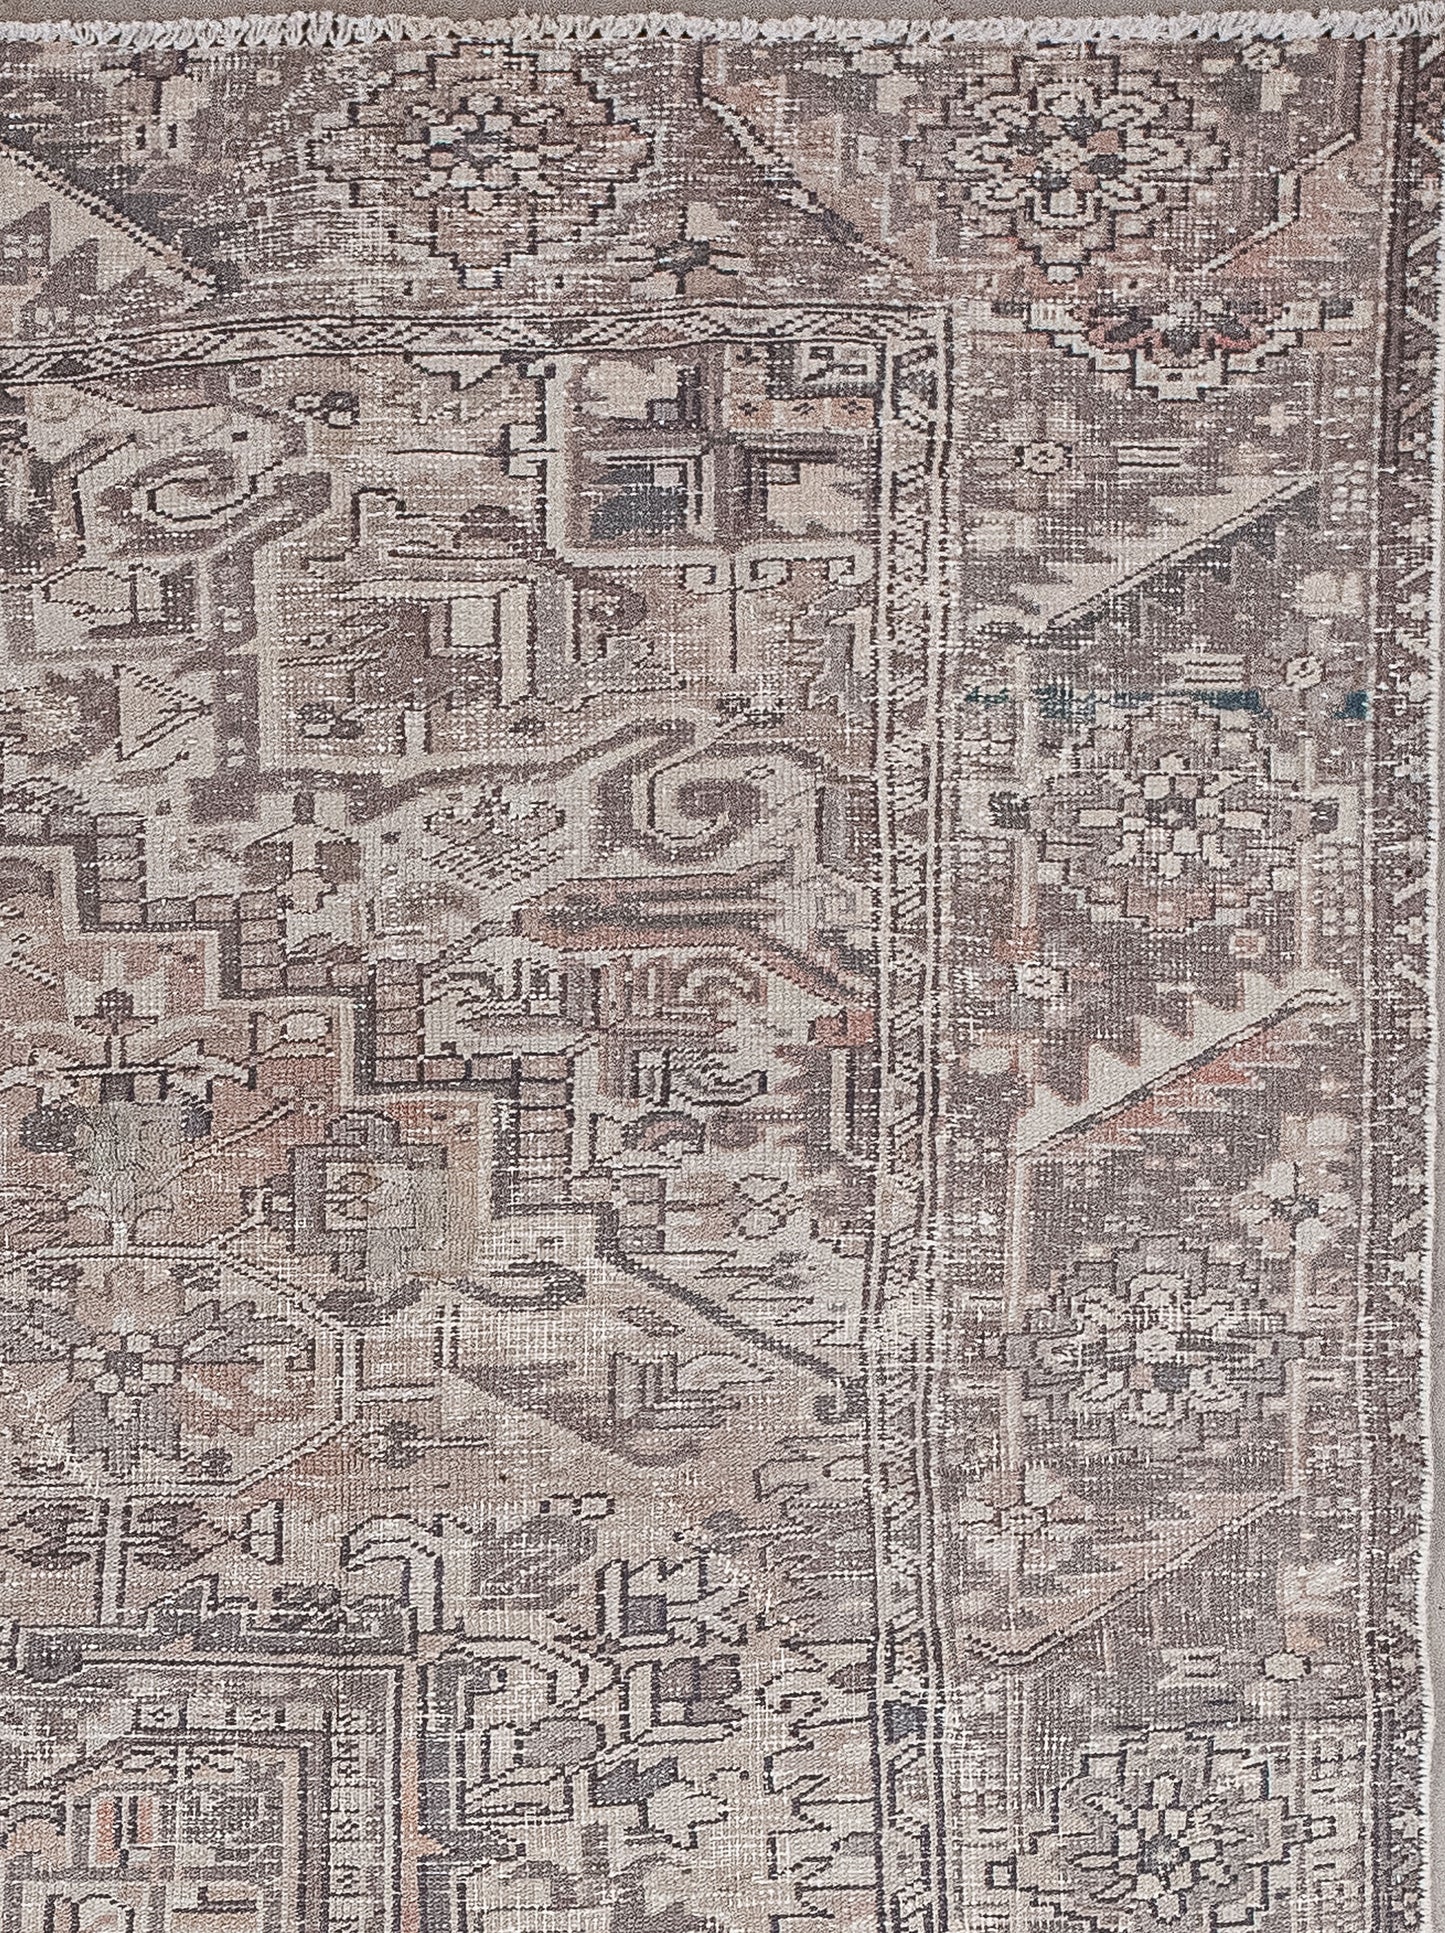 The entire perimeter has two very thin borders that hold a thick frame between them, its pattern shows many detailed geometric shapes that are flowers and tribal symbols.